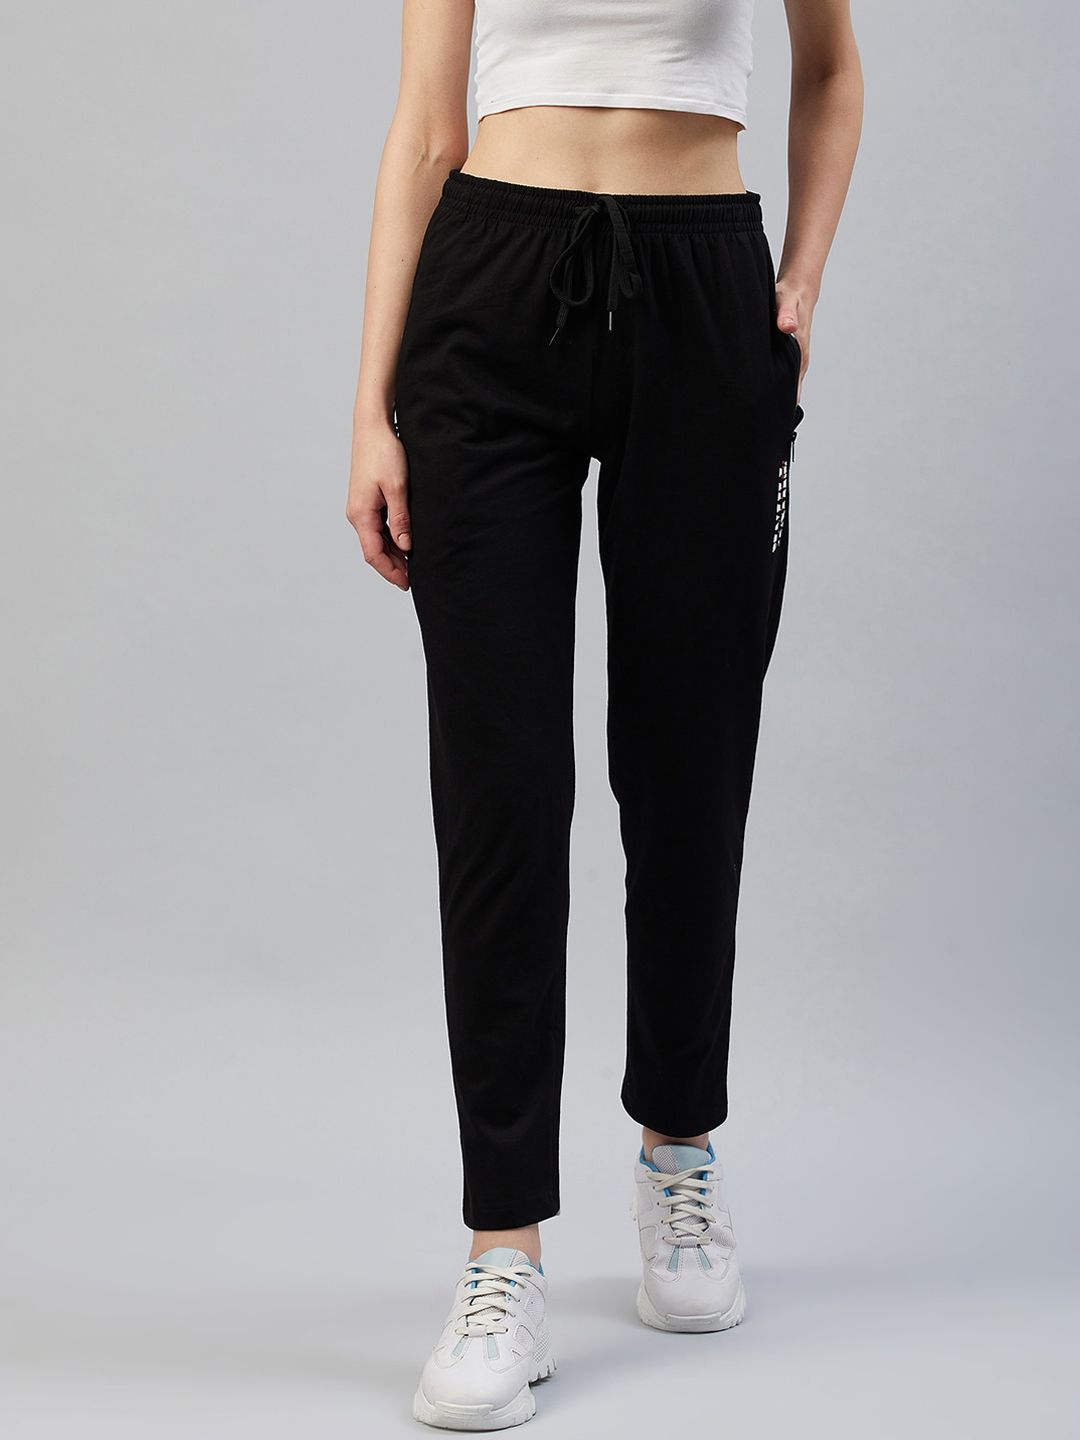 C9 AIRWEAR Women Black Solid Track Pants Price in India